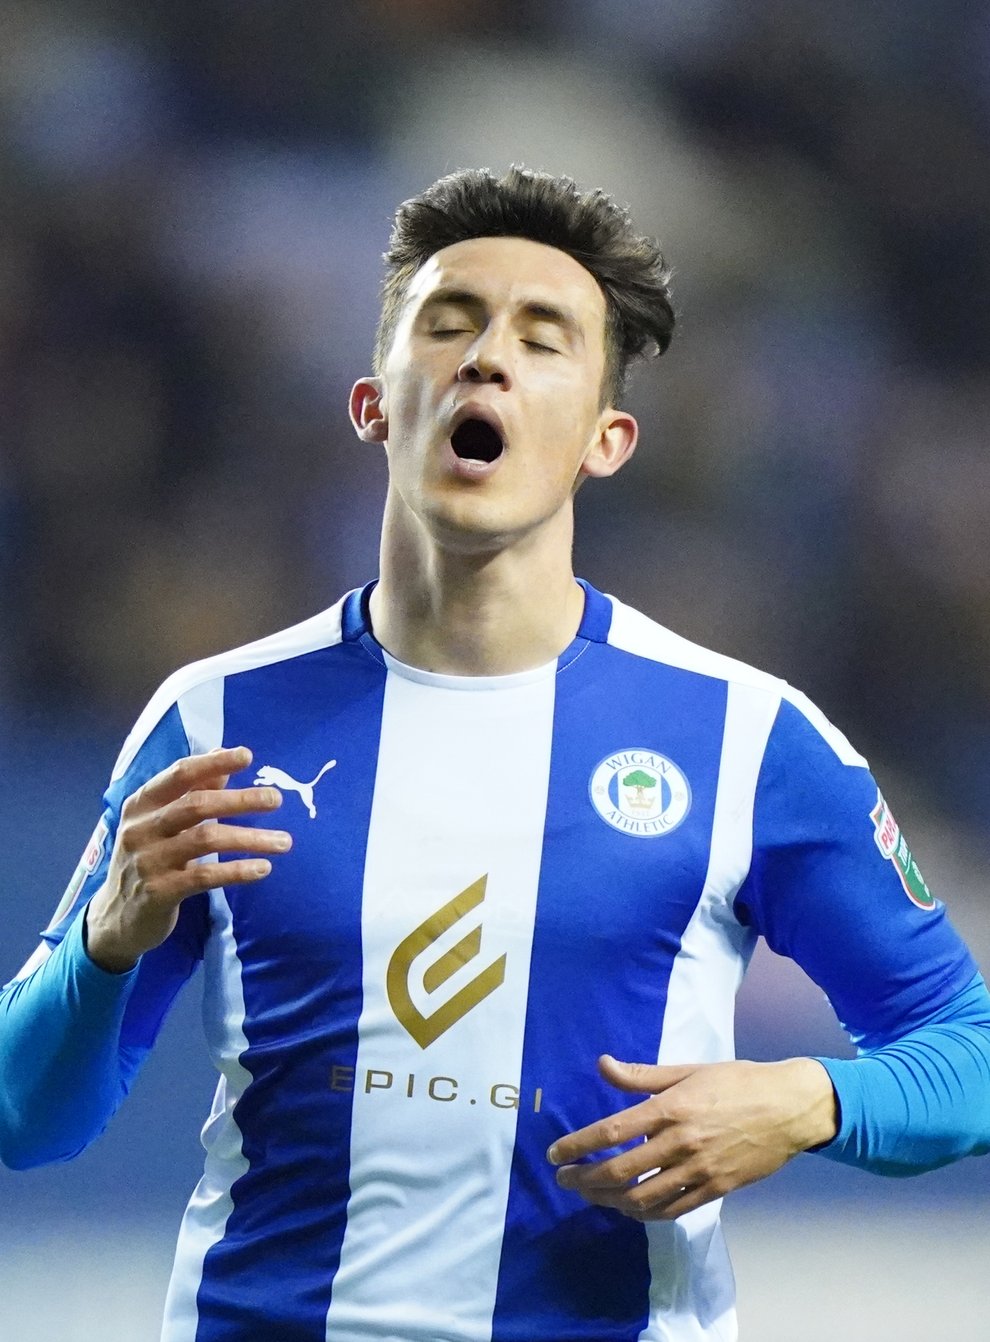 Wigan Athletic’s Jamie McGrath joins Dundee United on loan (Tim Goode/PA)